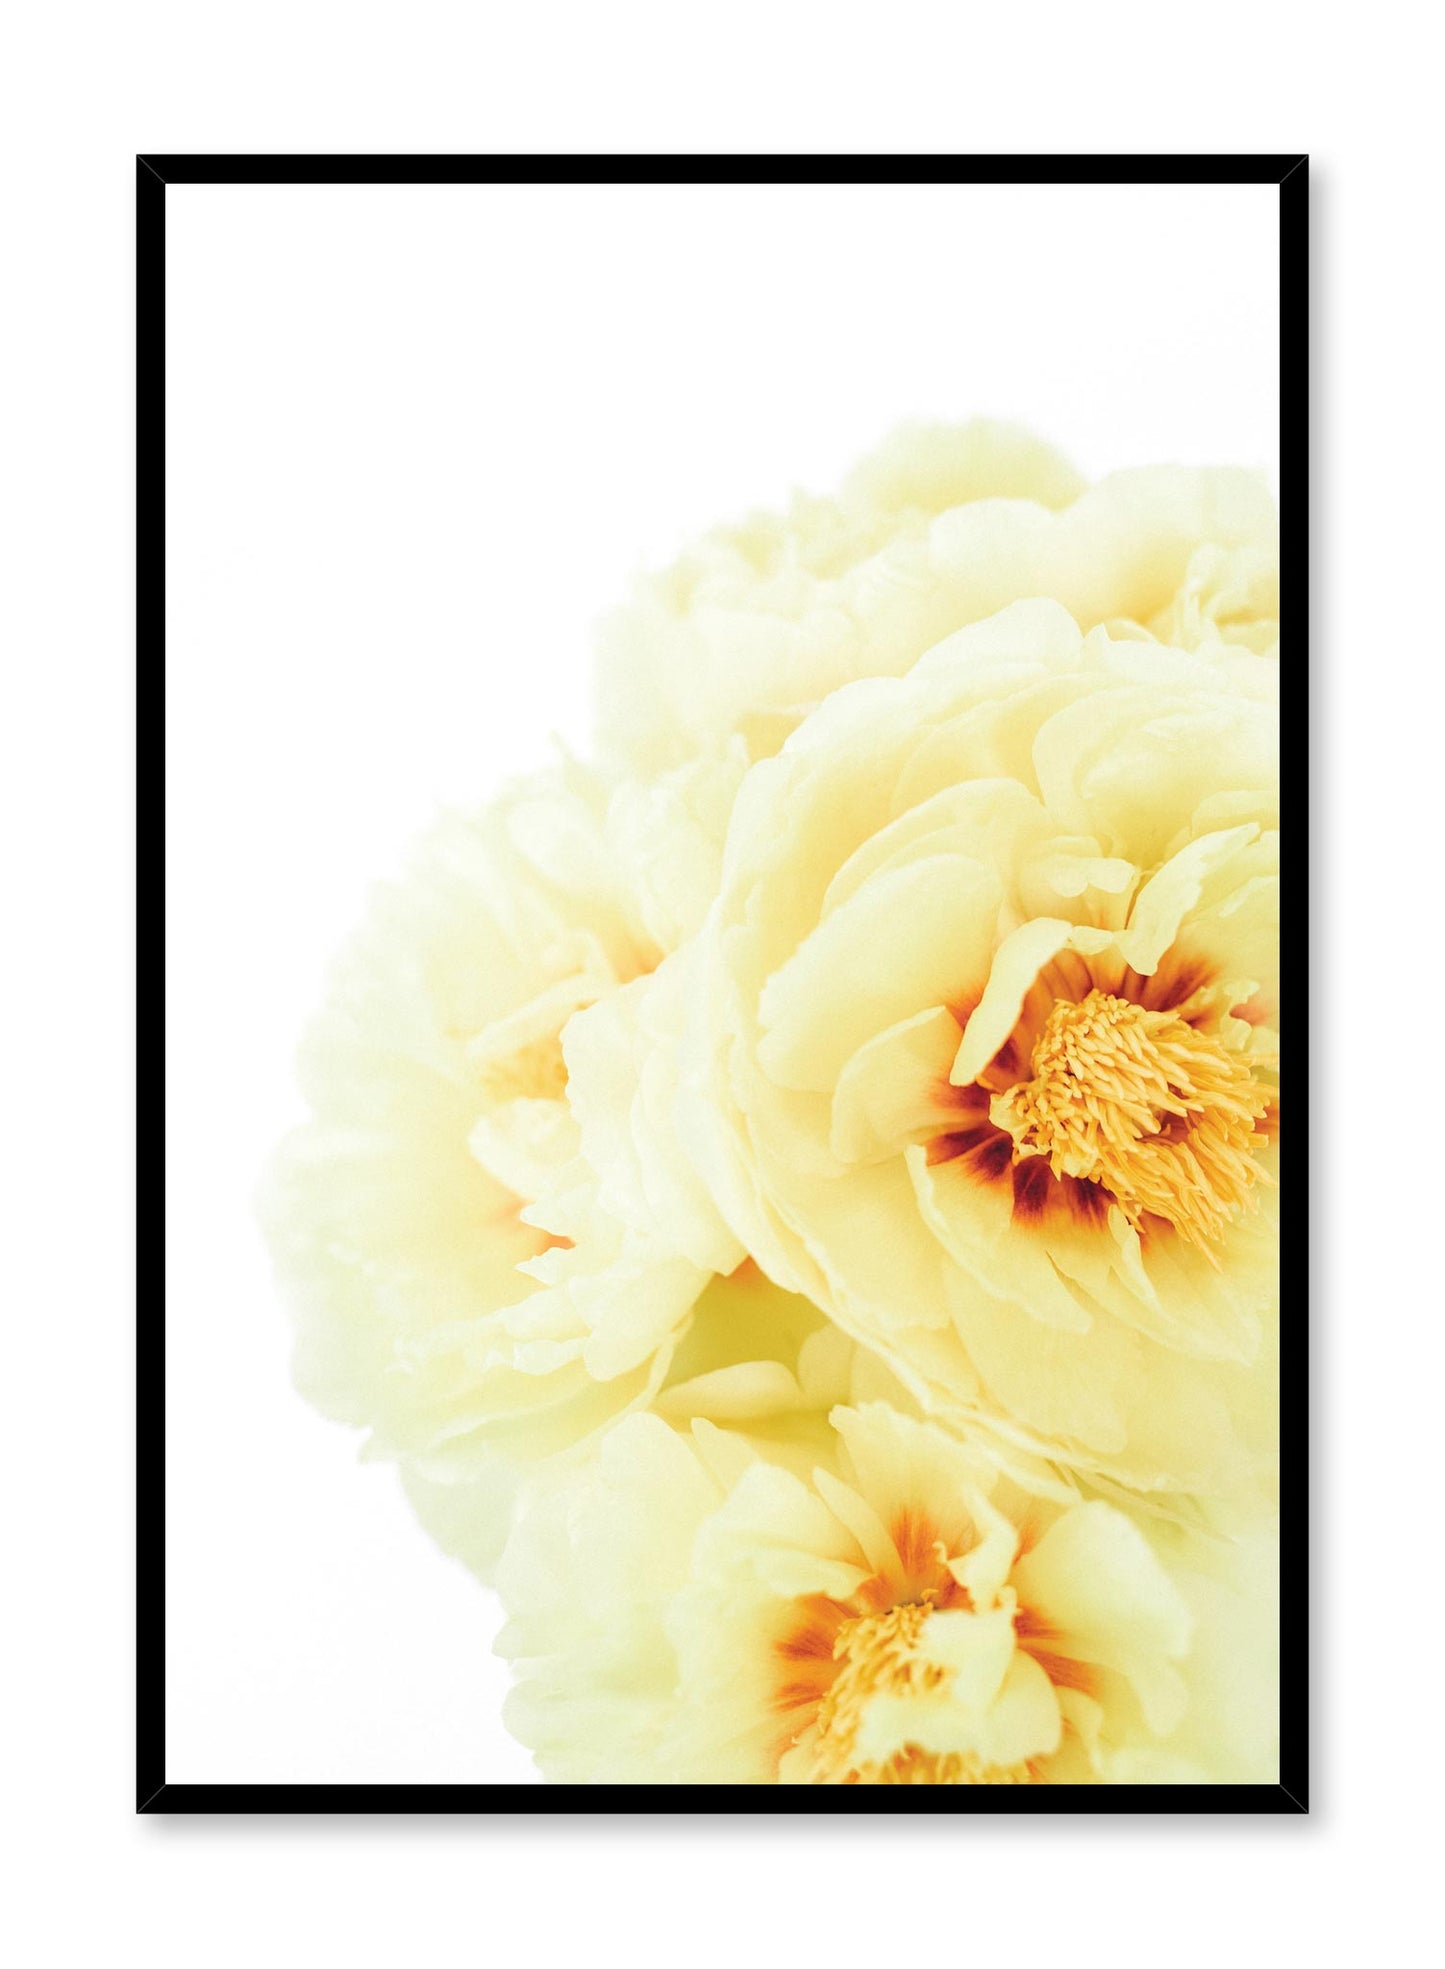 Minimalist wall poster by Opposite Wall with yellow peony bloom floral photography